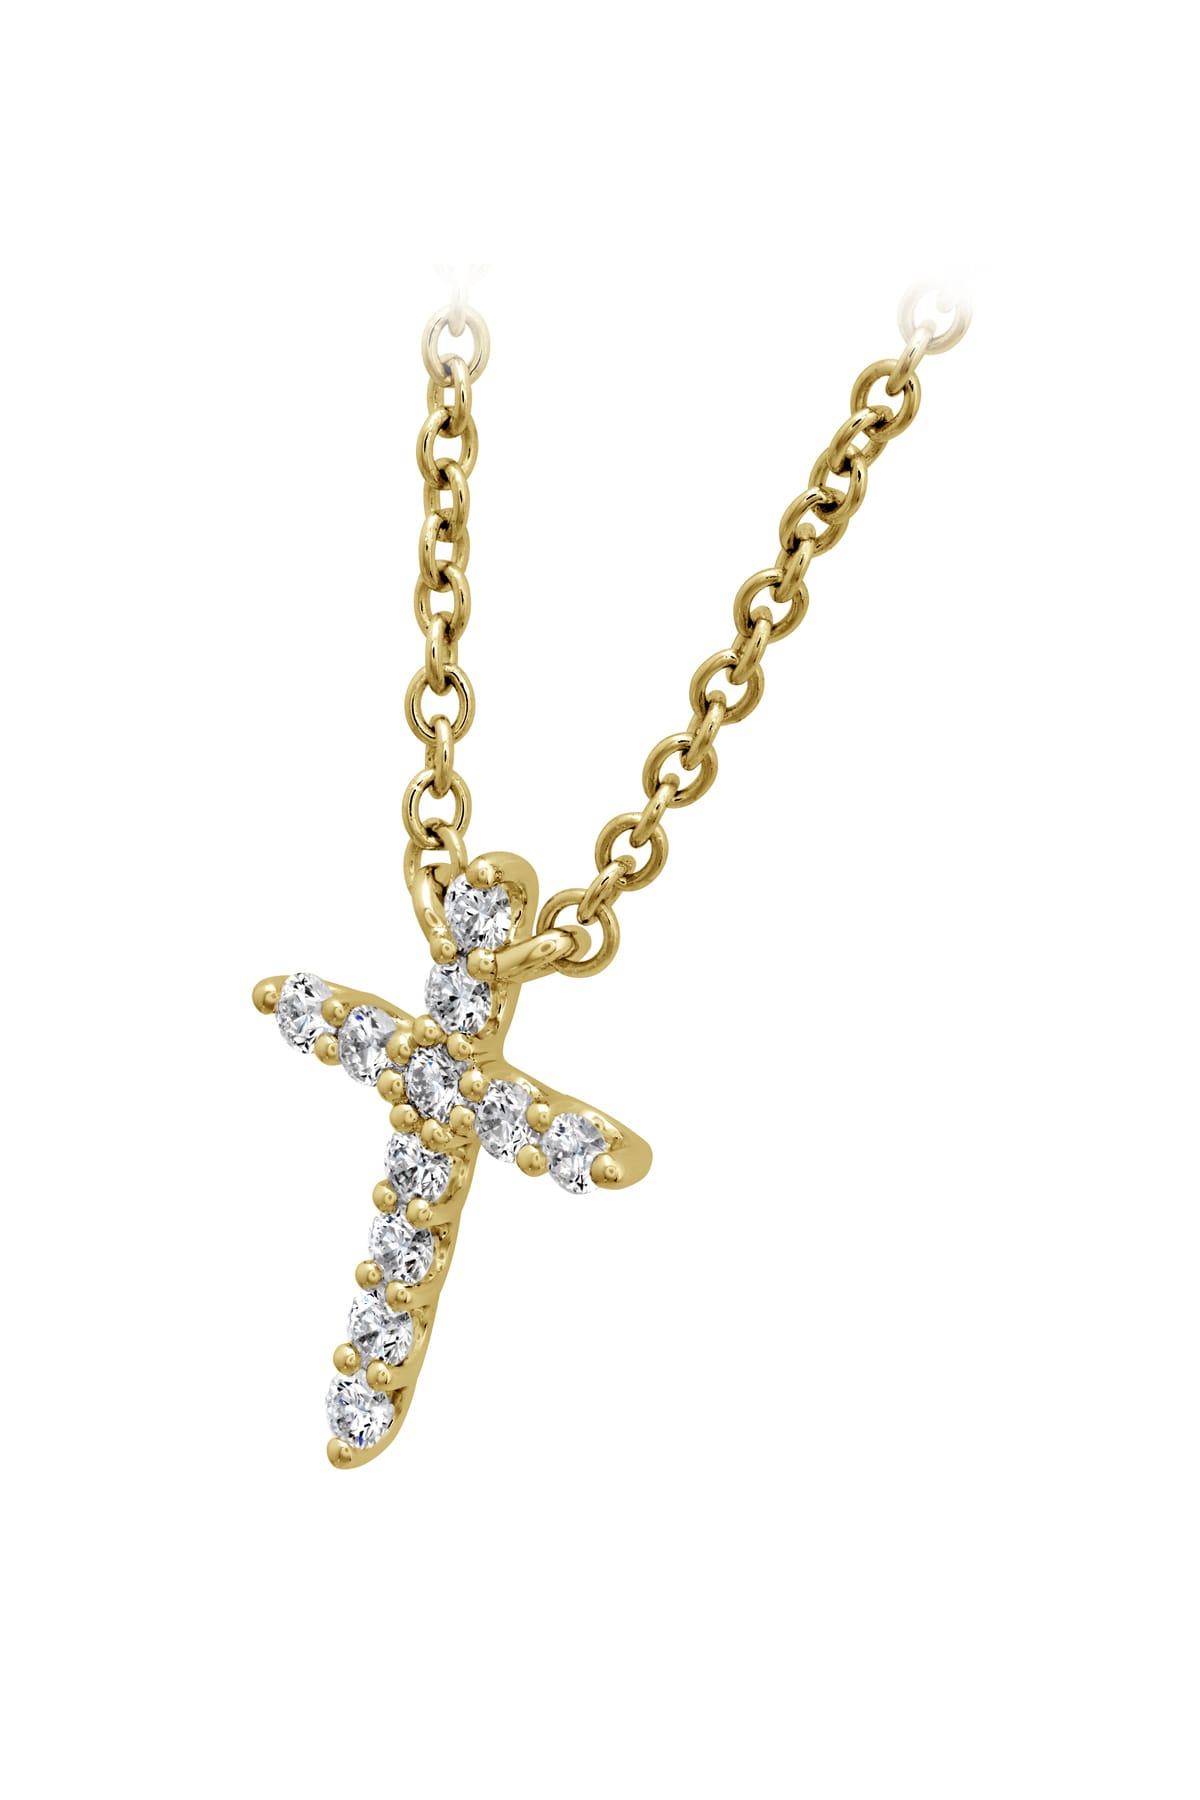 Small Signature Cross Pendant From Hearts On Fire available at LeGassick Diamonds and Jewellery Gold Coast, Australia.